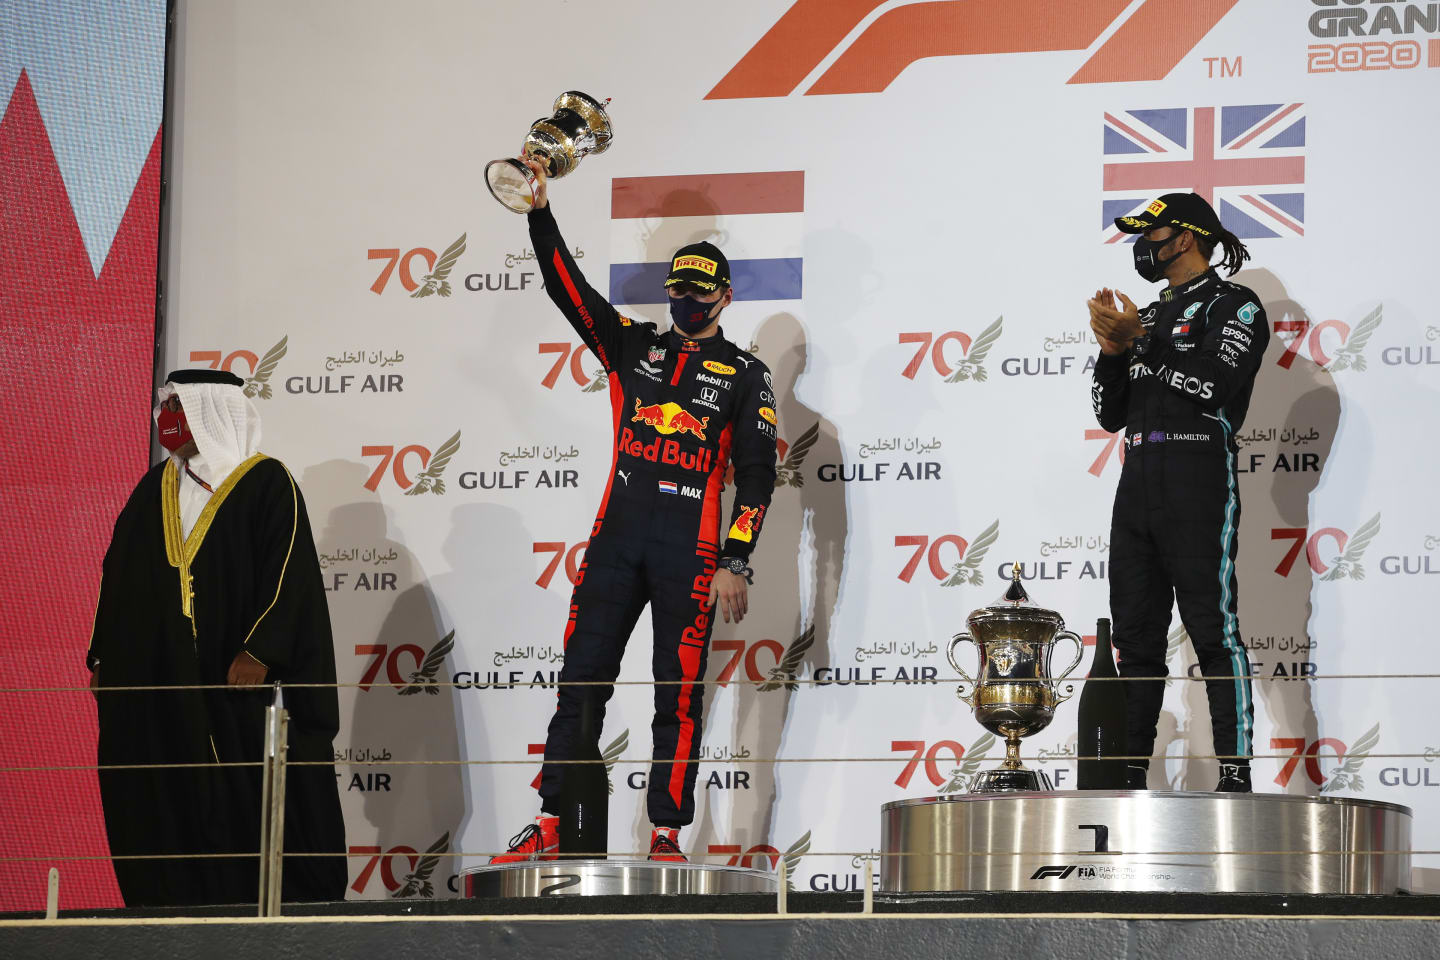 BAHRAIN, BAHRAIN - NOVEMBER 29: Second placed Max Verstappen of Netherlands and Red Bull Racing celebrates on the podium during the F1 Grand Prix of Bahrain at Bahrain International Circuit on November 29, 2020 in Bahrain, Bahrain. (Photo by Hamad Mohammed - Pool/Getty Images)